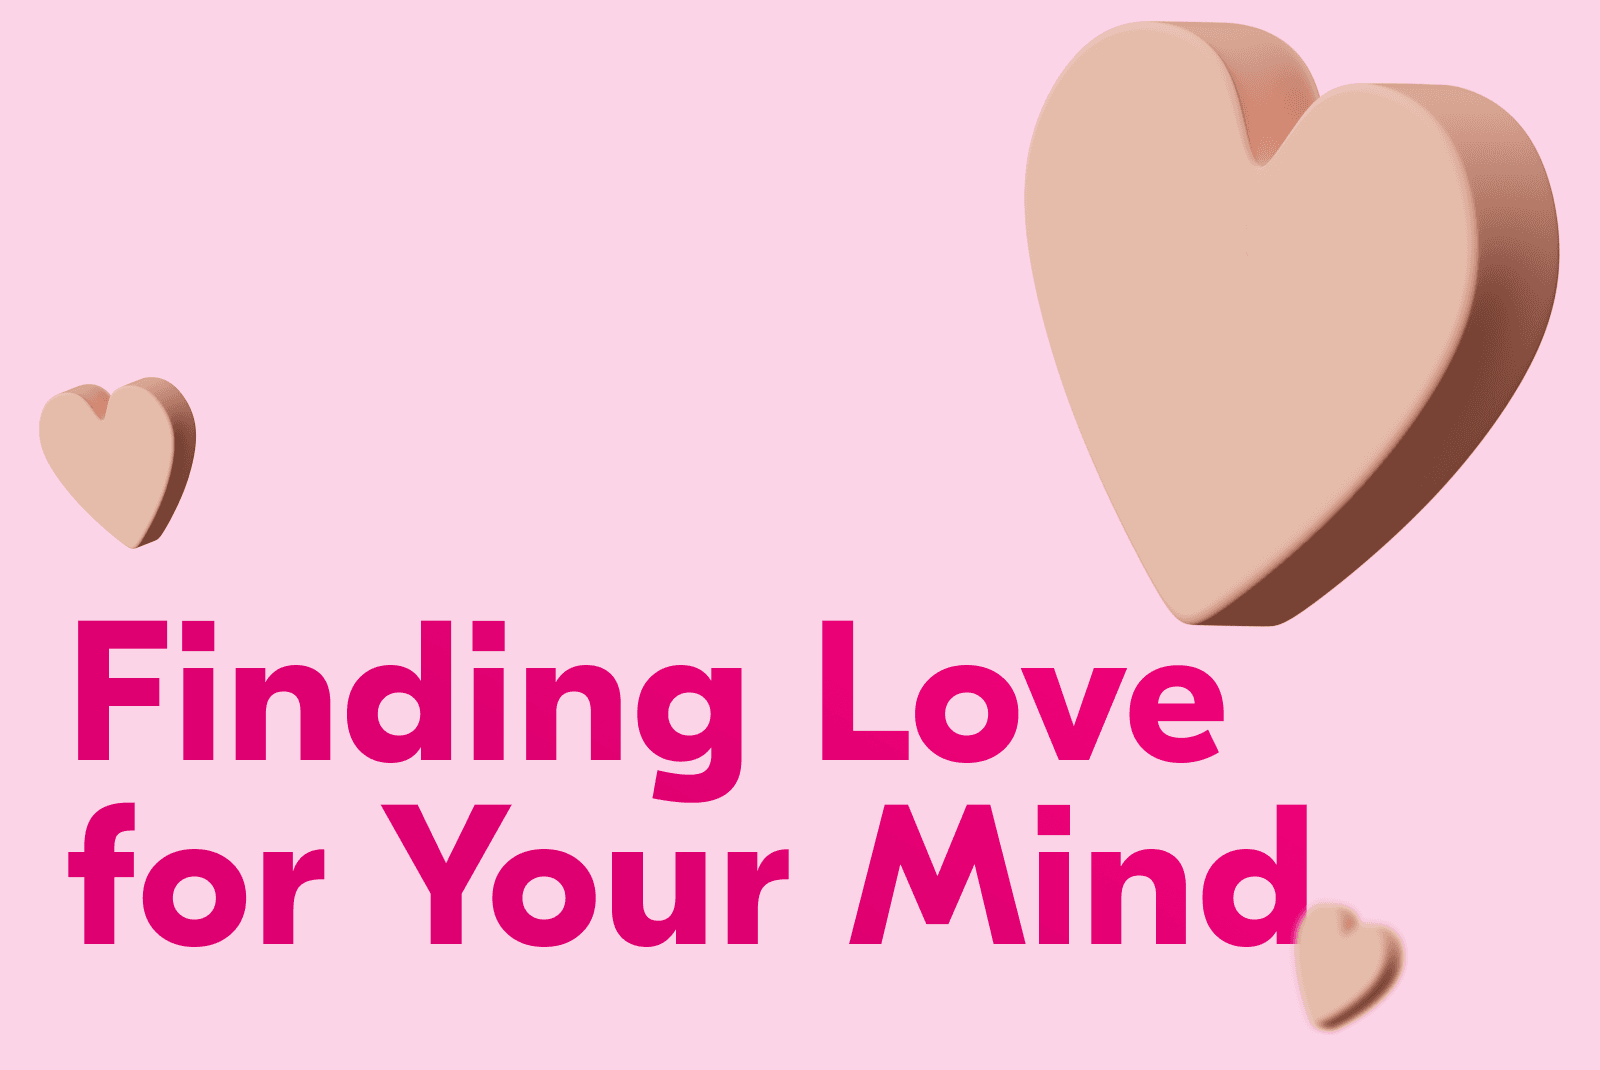 Mental Health and St. Valentine's Day: A Guide to Finding Balance